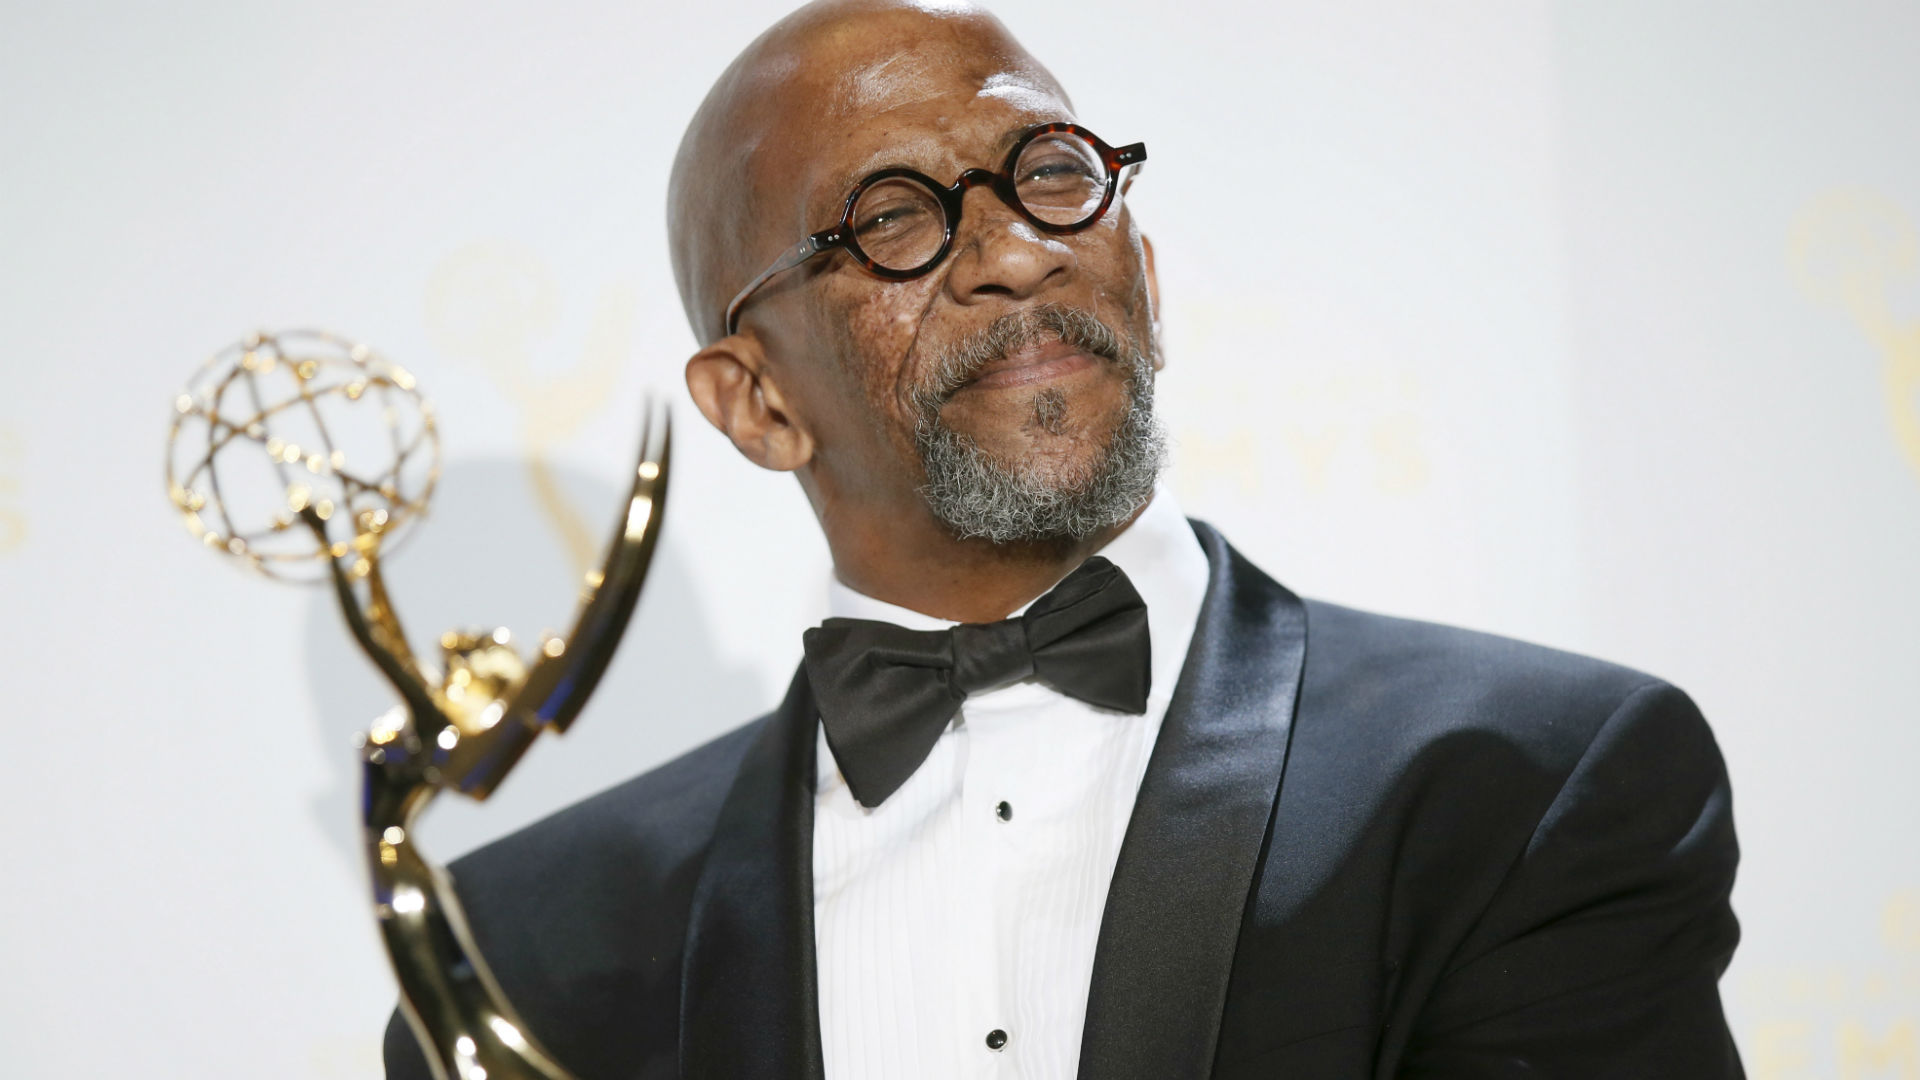 Muere Reg E. Cathey, actor de 'House of Cards' y 'The Wire'